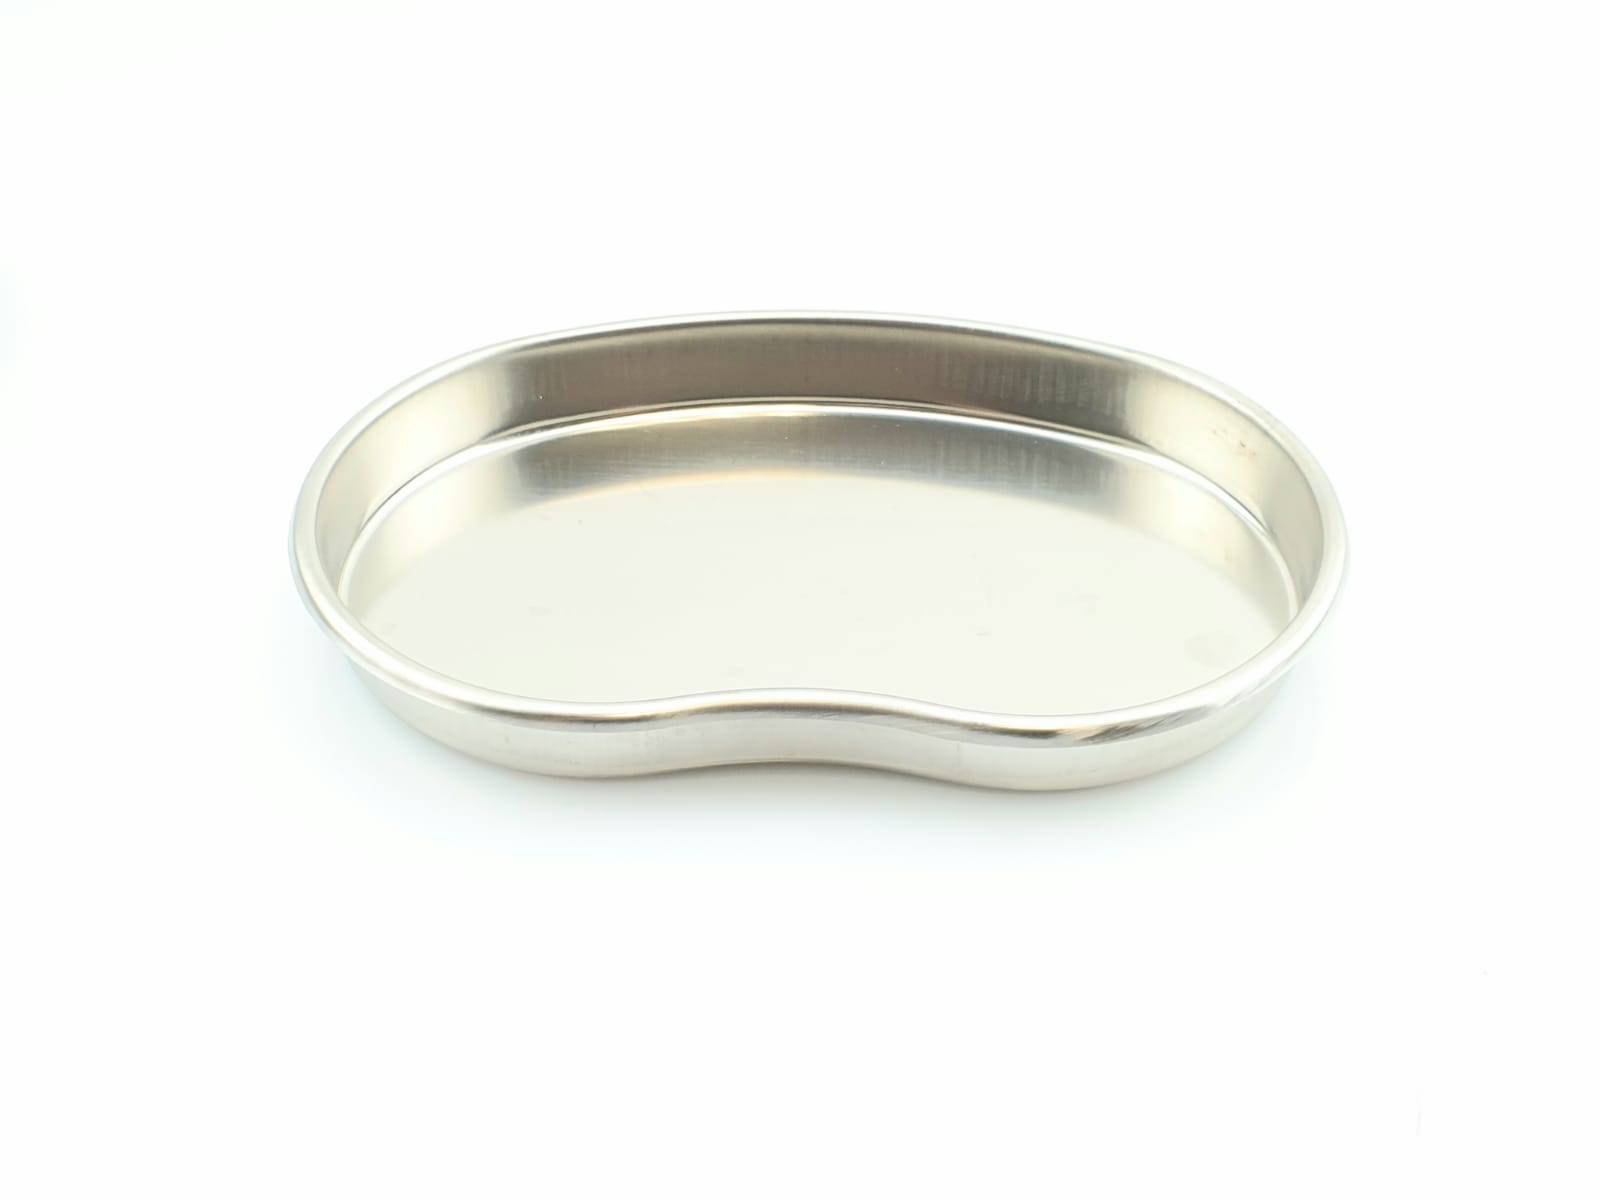 Kidney dish | stainless steel | small